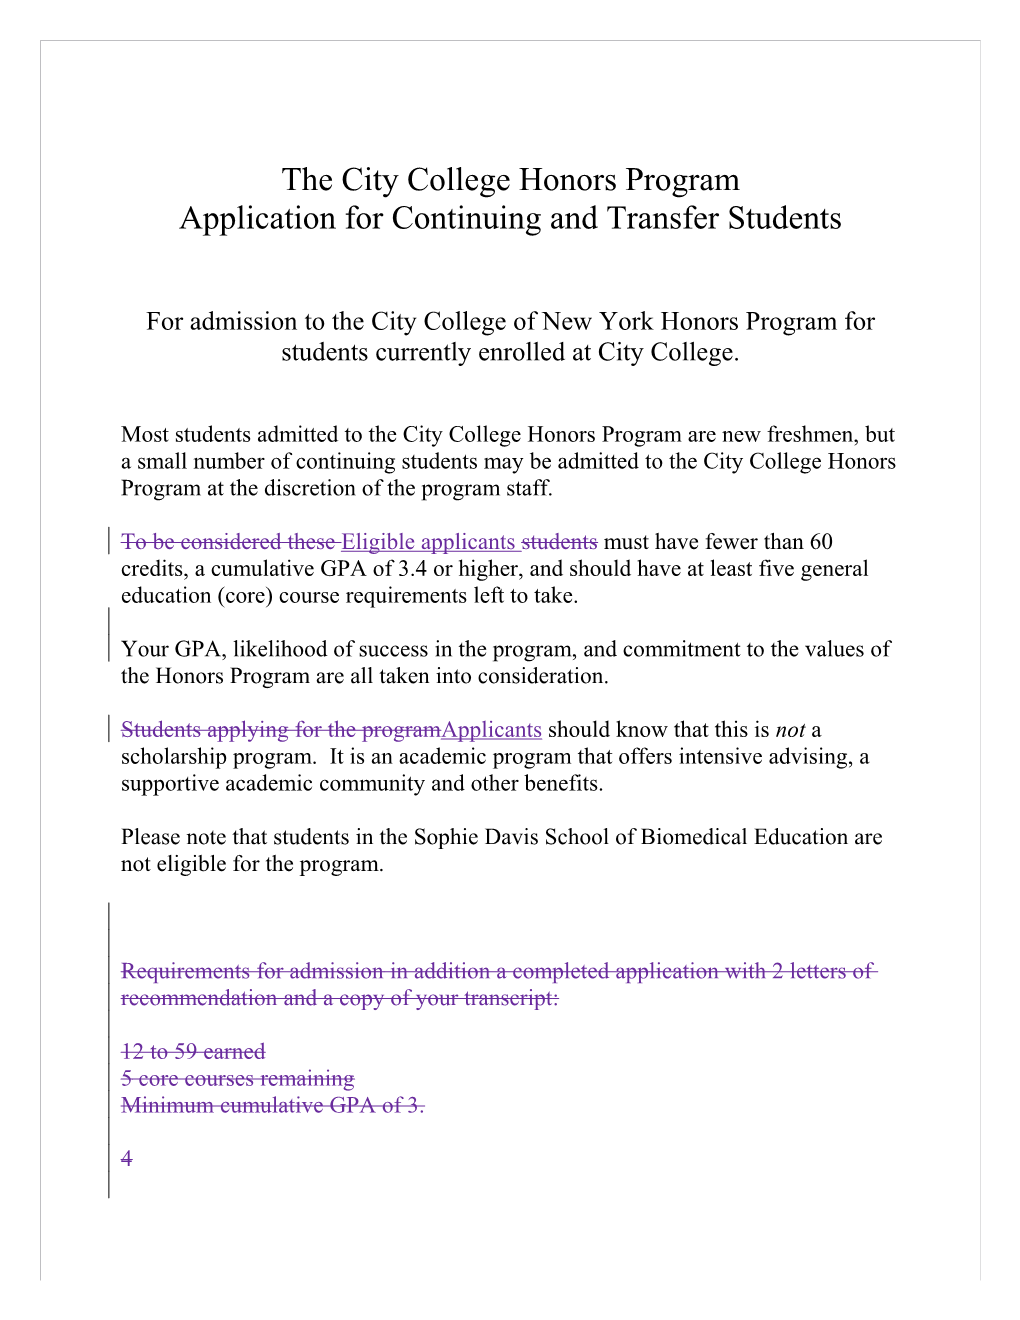 The City College Honors Program